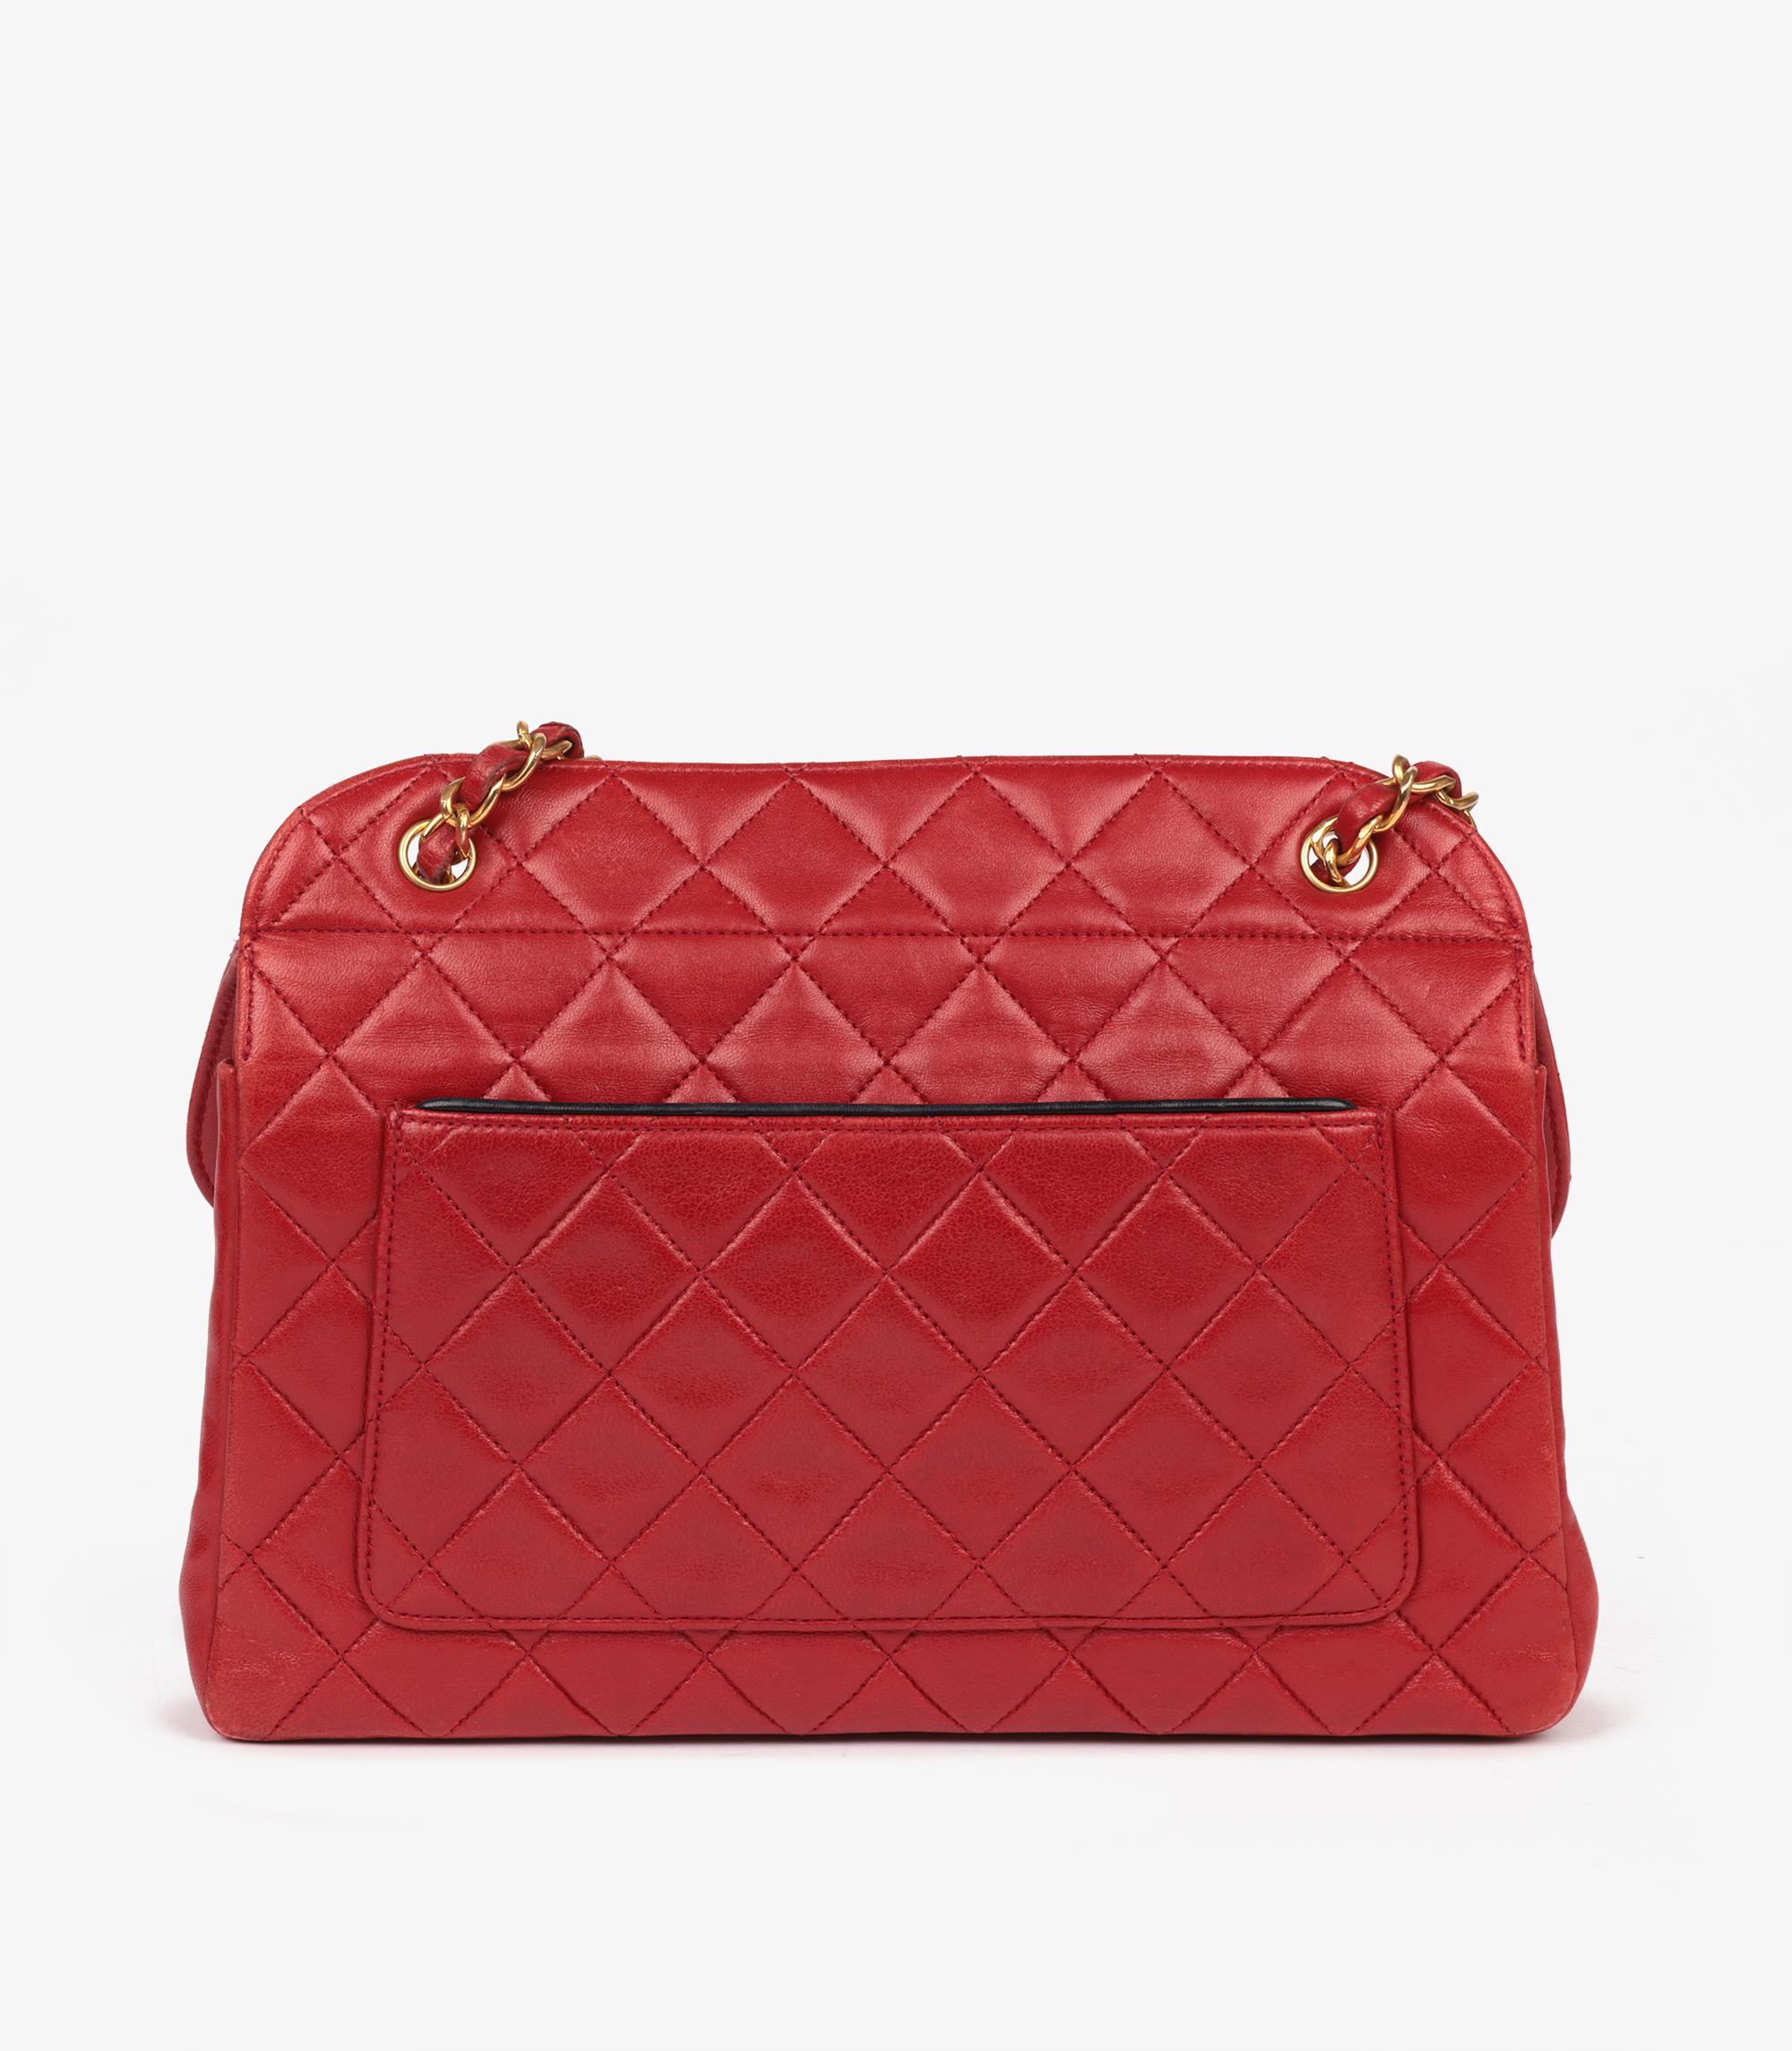 Chanel Red Quilted Lambskin Vintage Medium Classic Single Flap Bag With Pouch For Sale 1